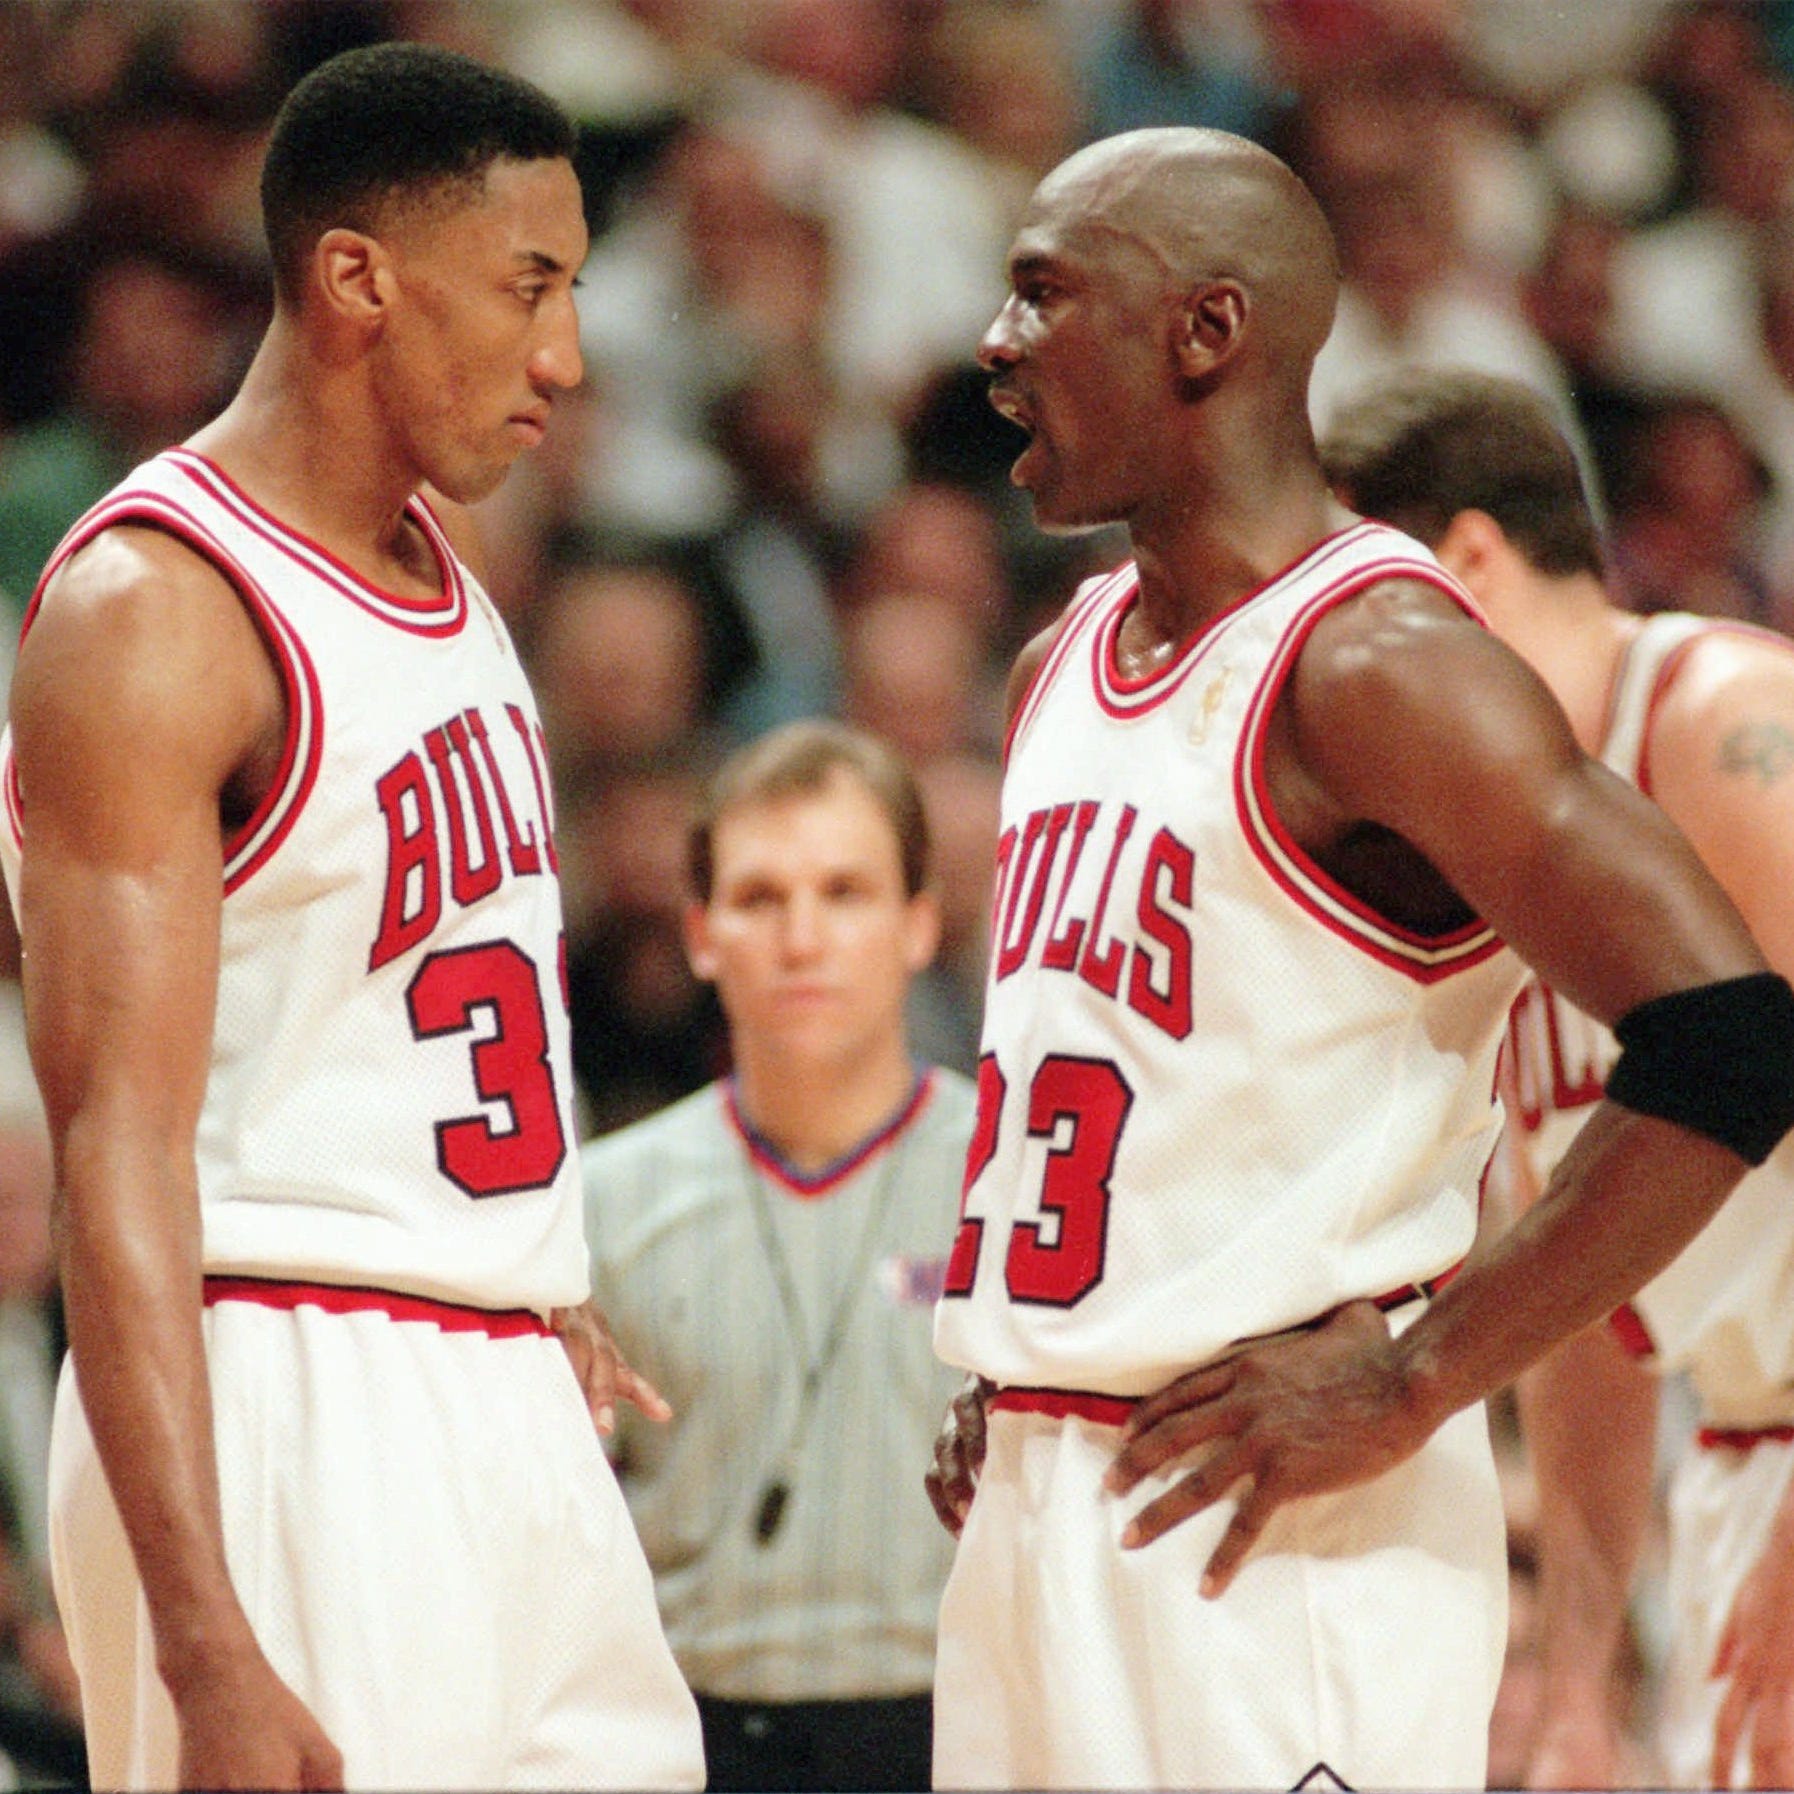 Scottie Pippen (left) has called Michael Jordan "the perfect teammates." But Pippen depicted Jordan in a different light in his book, 'Unguarded.'